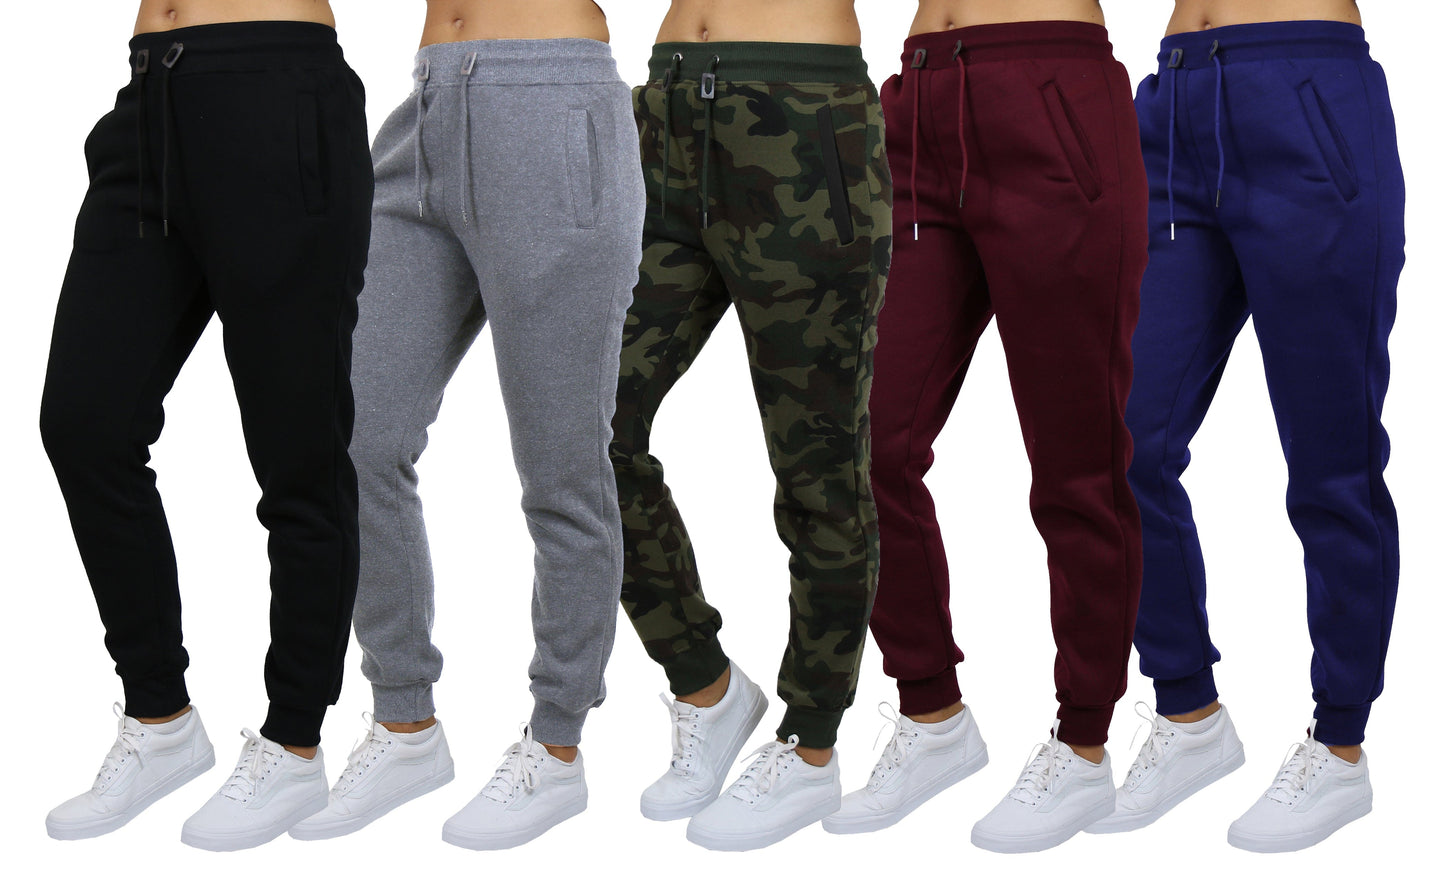 QWANG Women's Fleece & French Terry Oversized Loose-Fit Jogger Sweatpants  (S-2XL)